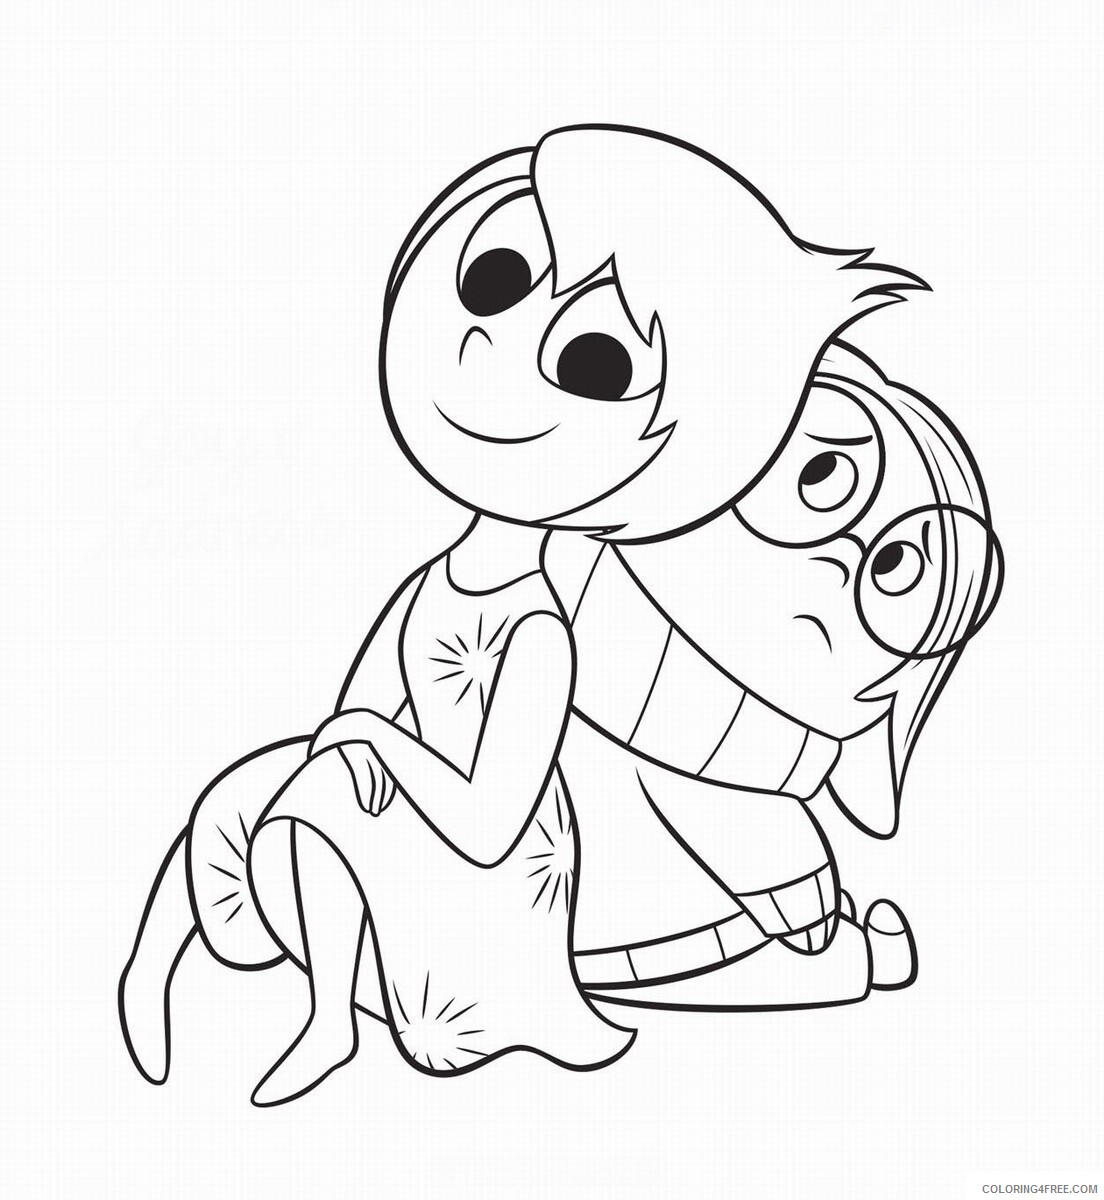 Inside Out Coloring Pages TV Film InsideOut_coloring_13 Printable 2020 03958 Coloring4free